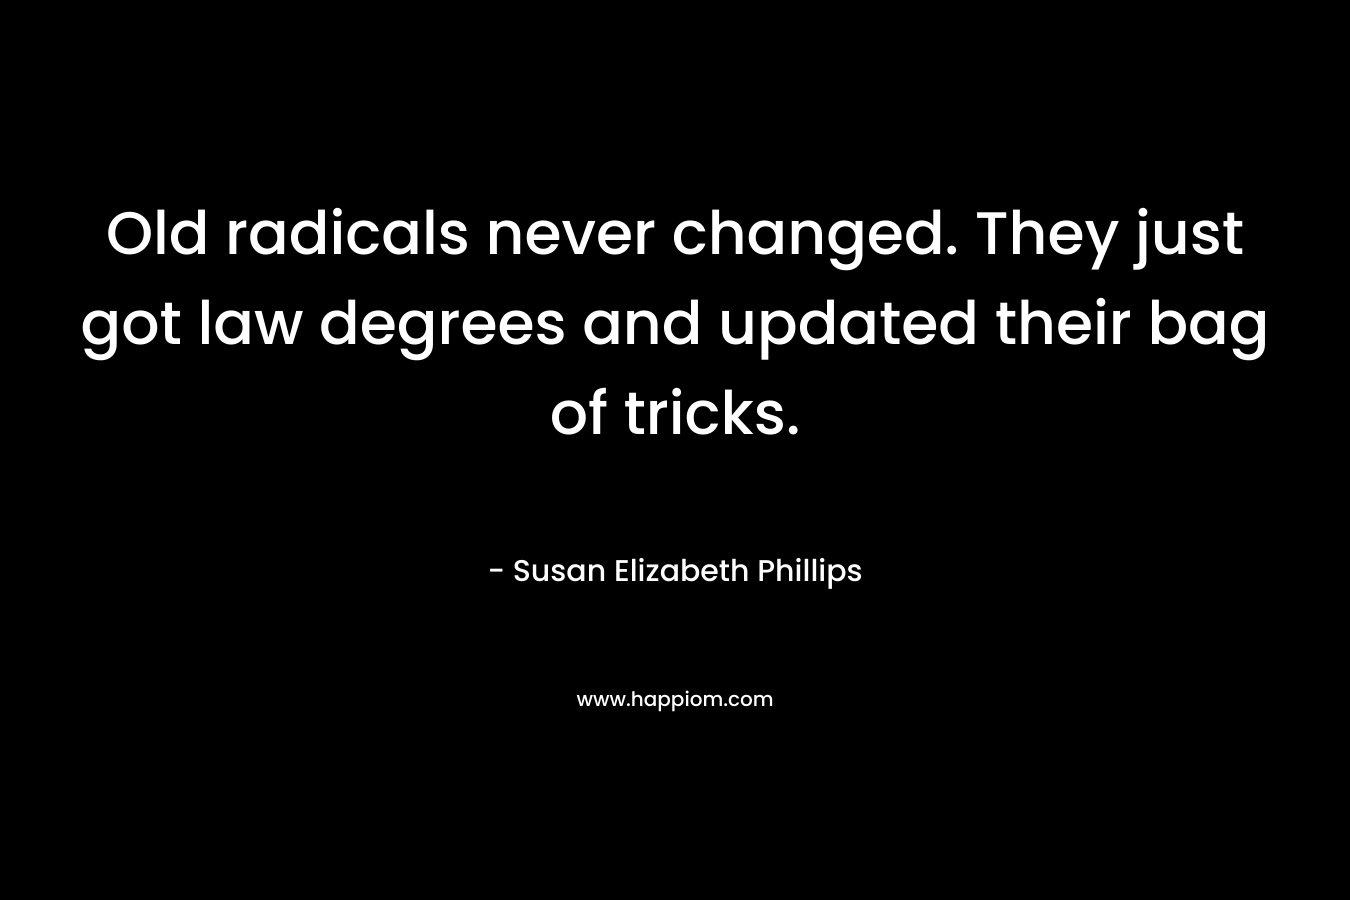 Old radicals never changed. They just got law degrees and updated their bag of tricks. – Susan Elizabeth Phillips